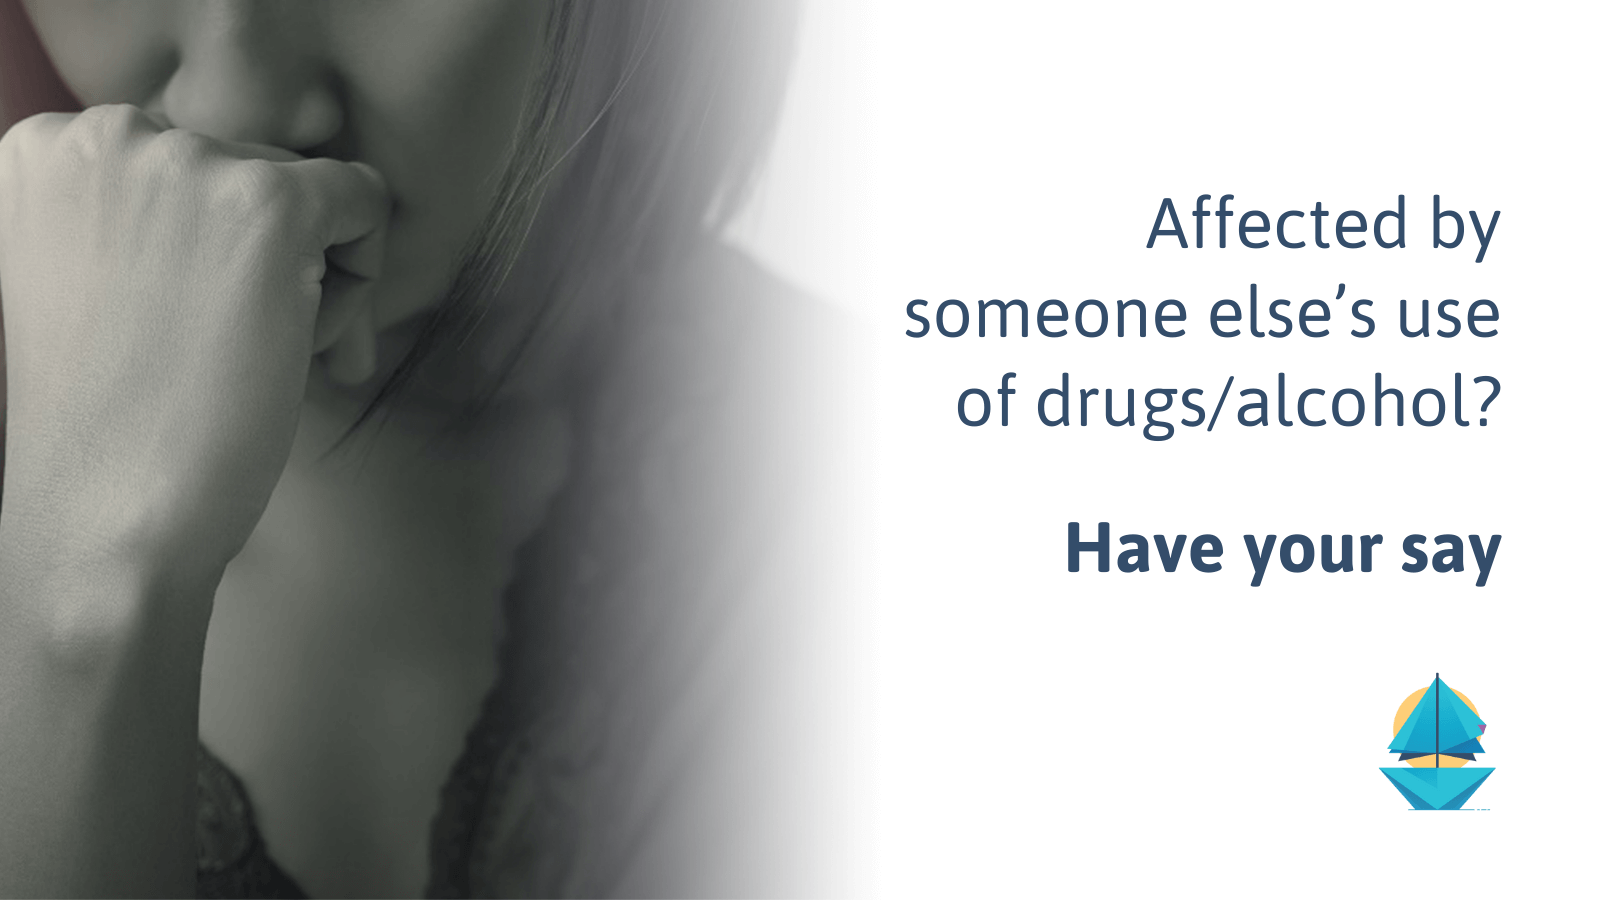 Are you supporting someone using drugs/alcohol? We need your help